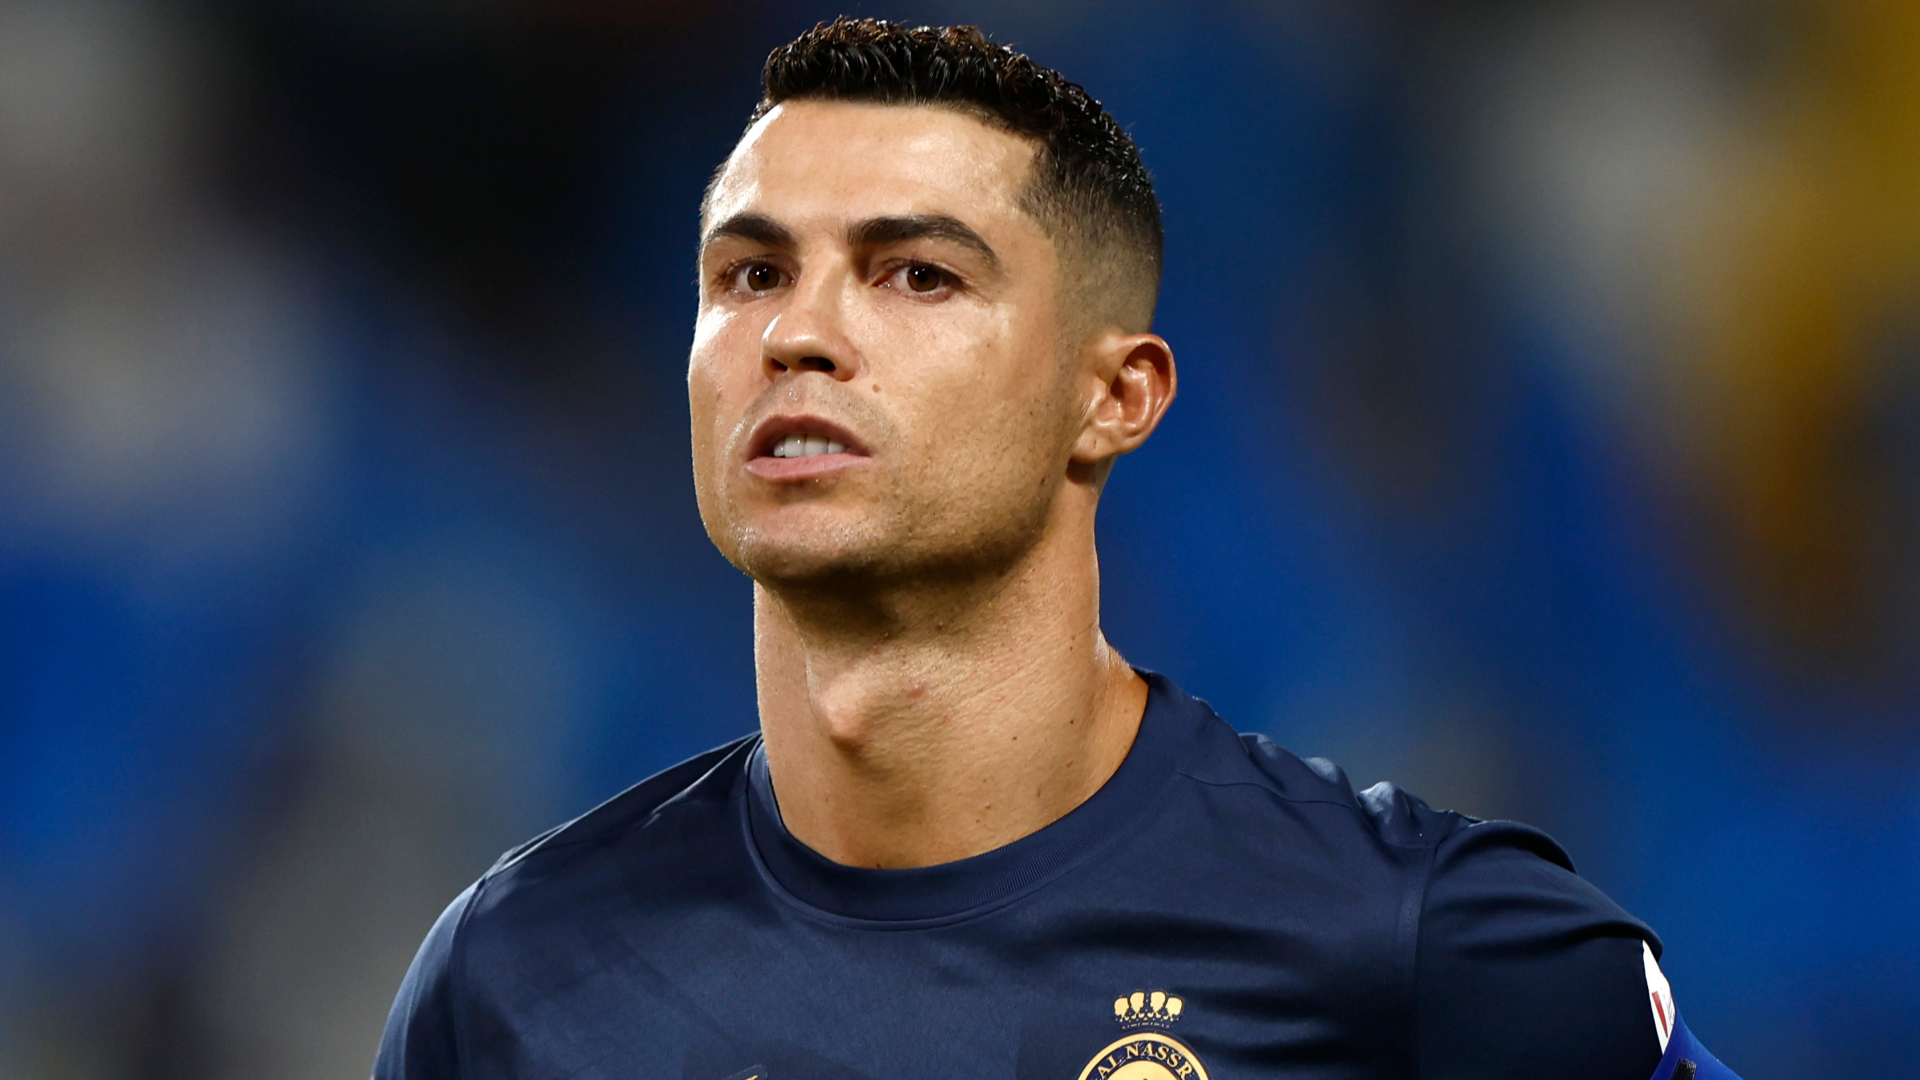 Cristiano Ronaldo New Look: As Juventus Star Sports New Hairdo, Take a Look  at His Three Memorable Hairstyles Over the Years!